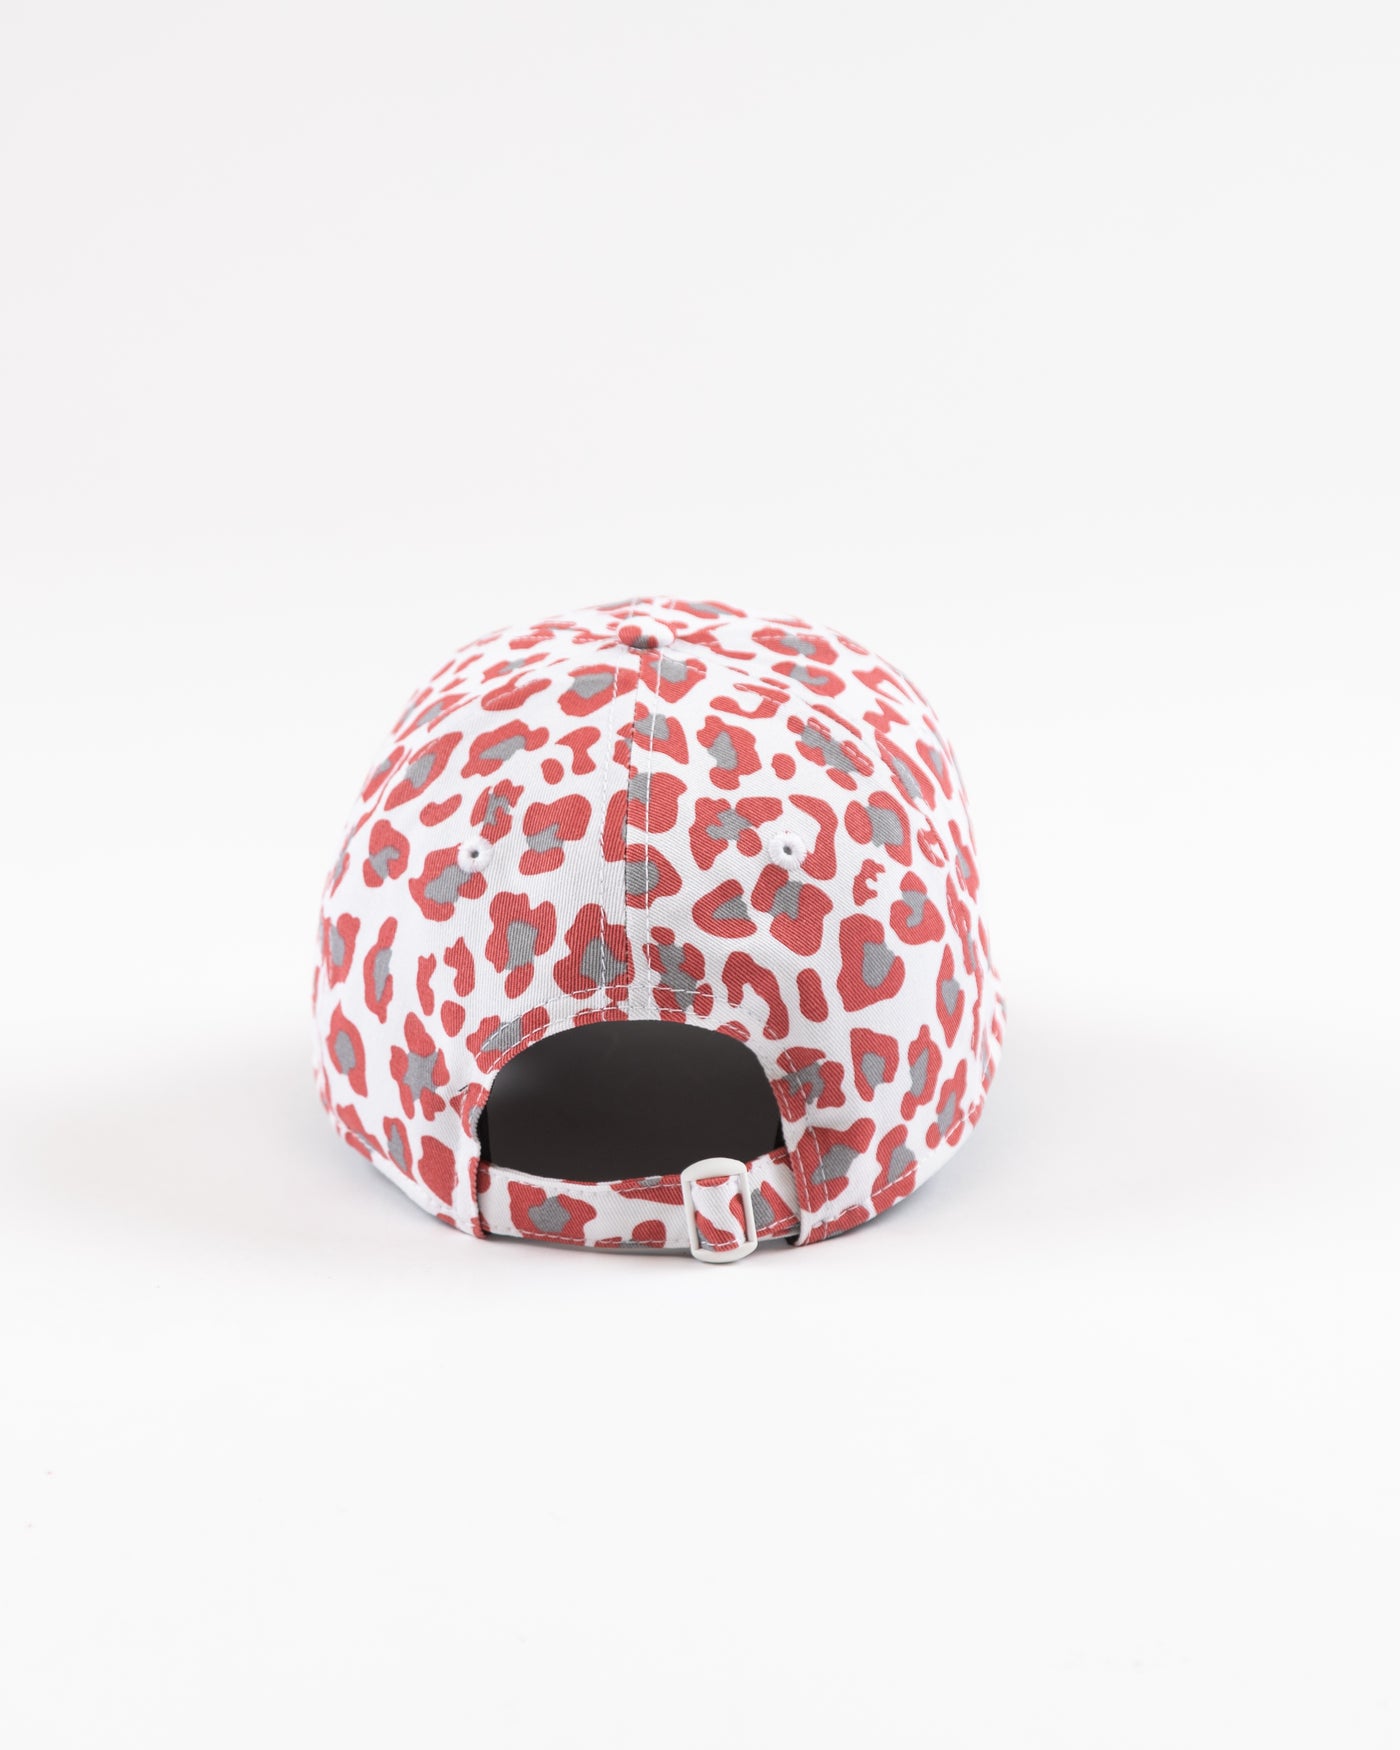 white New Era women's cap with all over pink cheetah print and Chicago Blackhawks primary logo on front - back angle lay flat